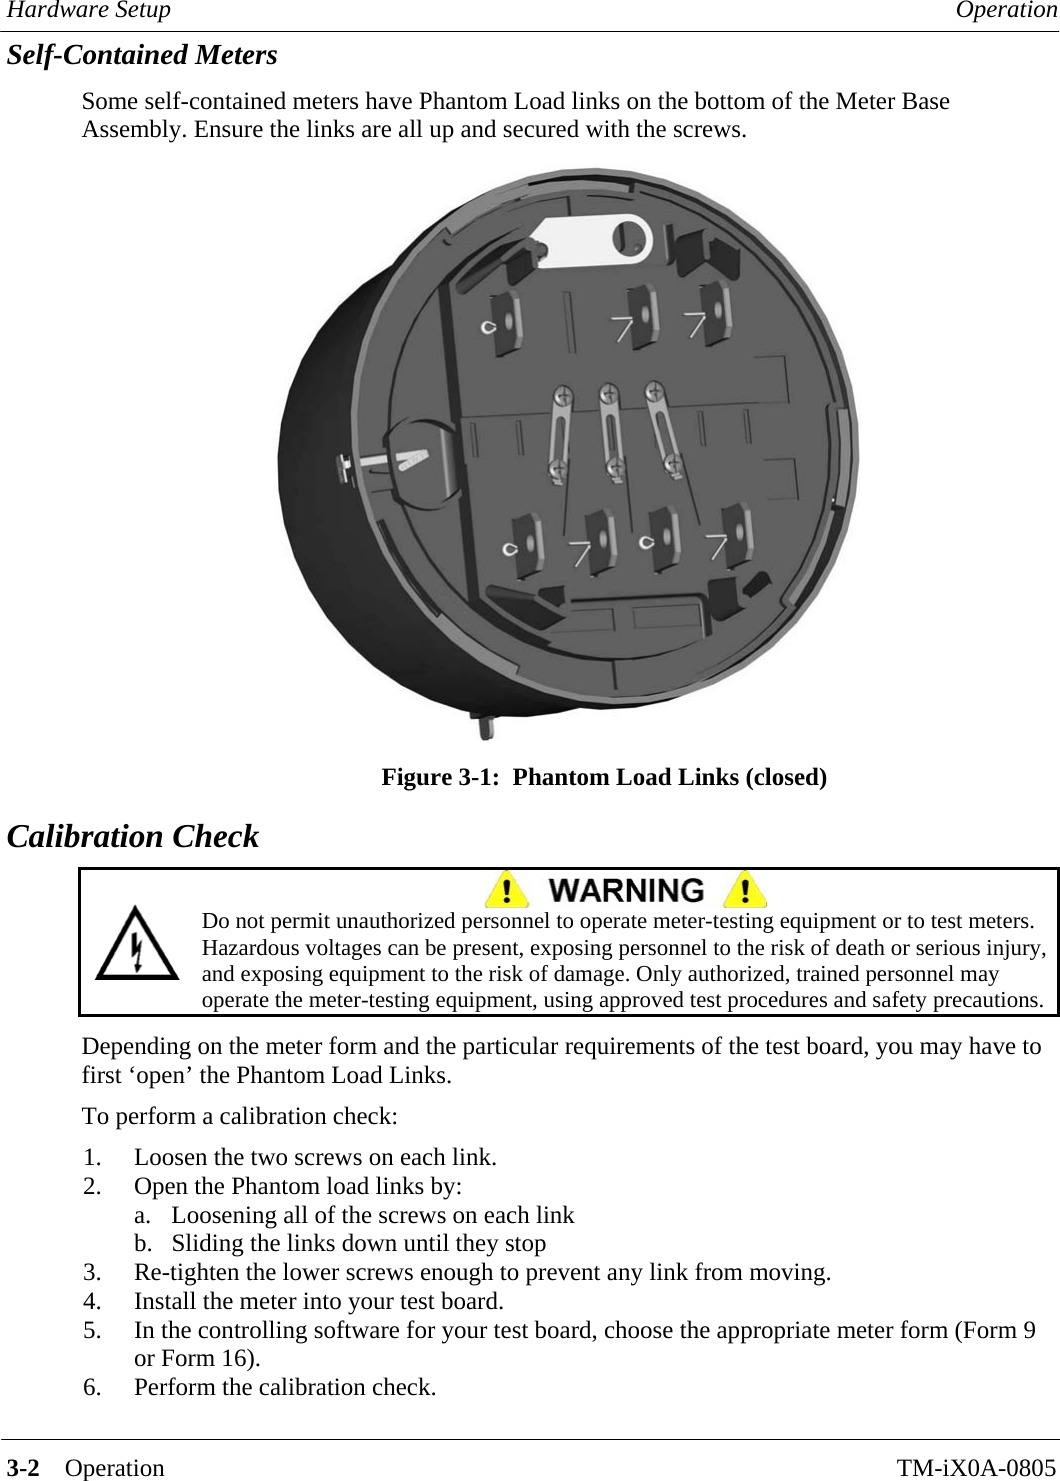 Hardware Setup  Operation   3-2    Operation TM-iX0A-0805 Self-Contained Meters Some self-contained meters have Phantom Load links on the bottom of the Meter Base Assembly. Ensure the links are all up and secured with the screws.  Figure 3-1:  Phantom Load Links (closed) Calibration Check   Do not permit unauthorized personnel to operate meter-testing equipment or to test meters. Hazardous voltages can be present, exposing personnel to the risk of death or serious injury, and exposing equipment to the risk of damage. Only authorized, trained personnel may operate the meter-testing equipment, using approved test procedures and safety precautions.  Depending on the meter form and the particular requirements of the test board, you may have to first ‘open’ the Phantom Load Links.  To perform a calibration check: 1.  Loosen the two screws on each link. 2.  Open the Phantom load links by: a.  Loosening all of the screws on each link b.  Sliding the links down until they stop 3.  Re-tighten the lower screws enough to prevent any link from moving. 4.  Install the meter into your test board. 5.  In the controlling software for your test board, choose the appropriate meter form (Form 9 or Form 16). 6.  Perform the calibration check.       